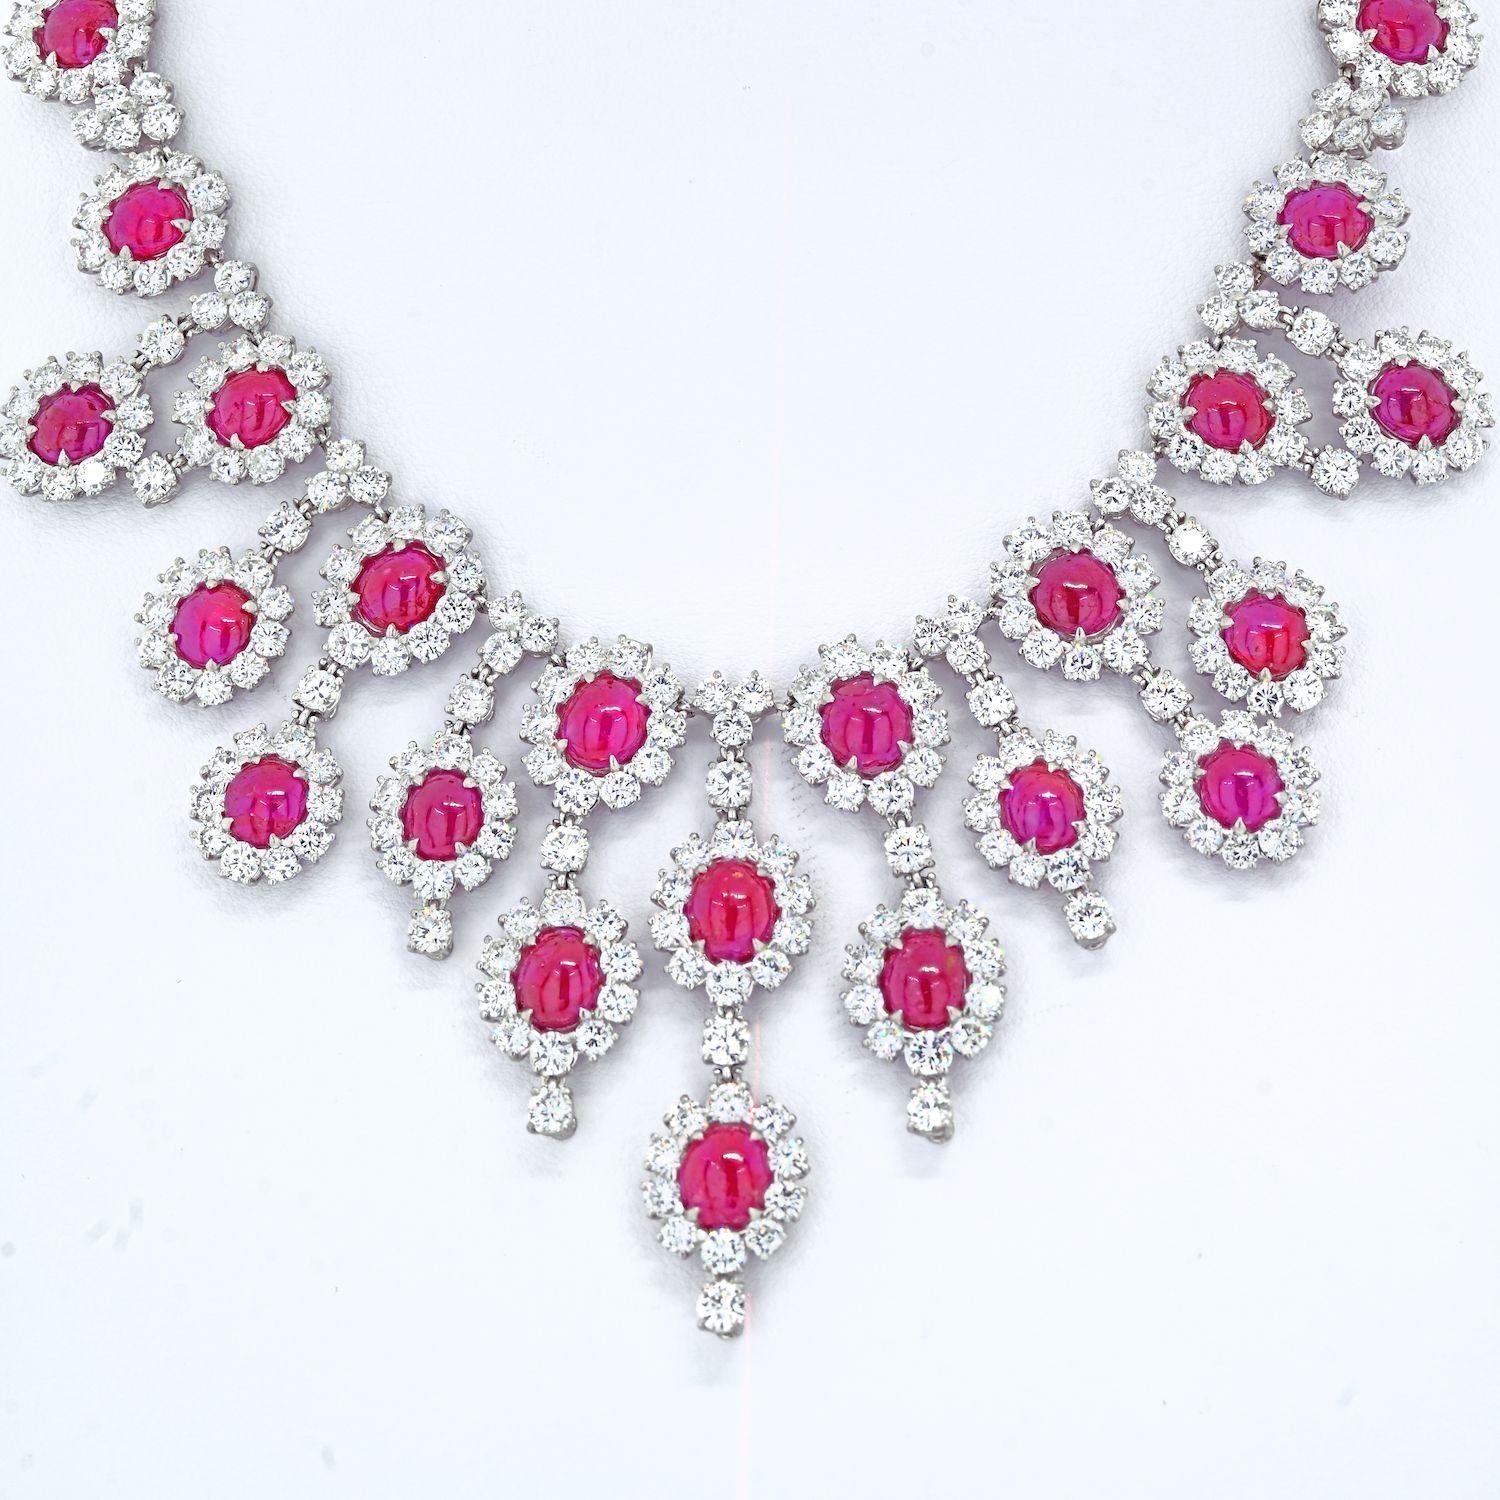 Platinum ruby and diamond chandelier necklace with 24 oval cut rubies and brilliant and brilliant cut diamonds. 
Lord of the gemstones or king of all precious stones, rubies have carved up their way to prominence in every culture in the world. Ruby